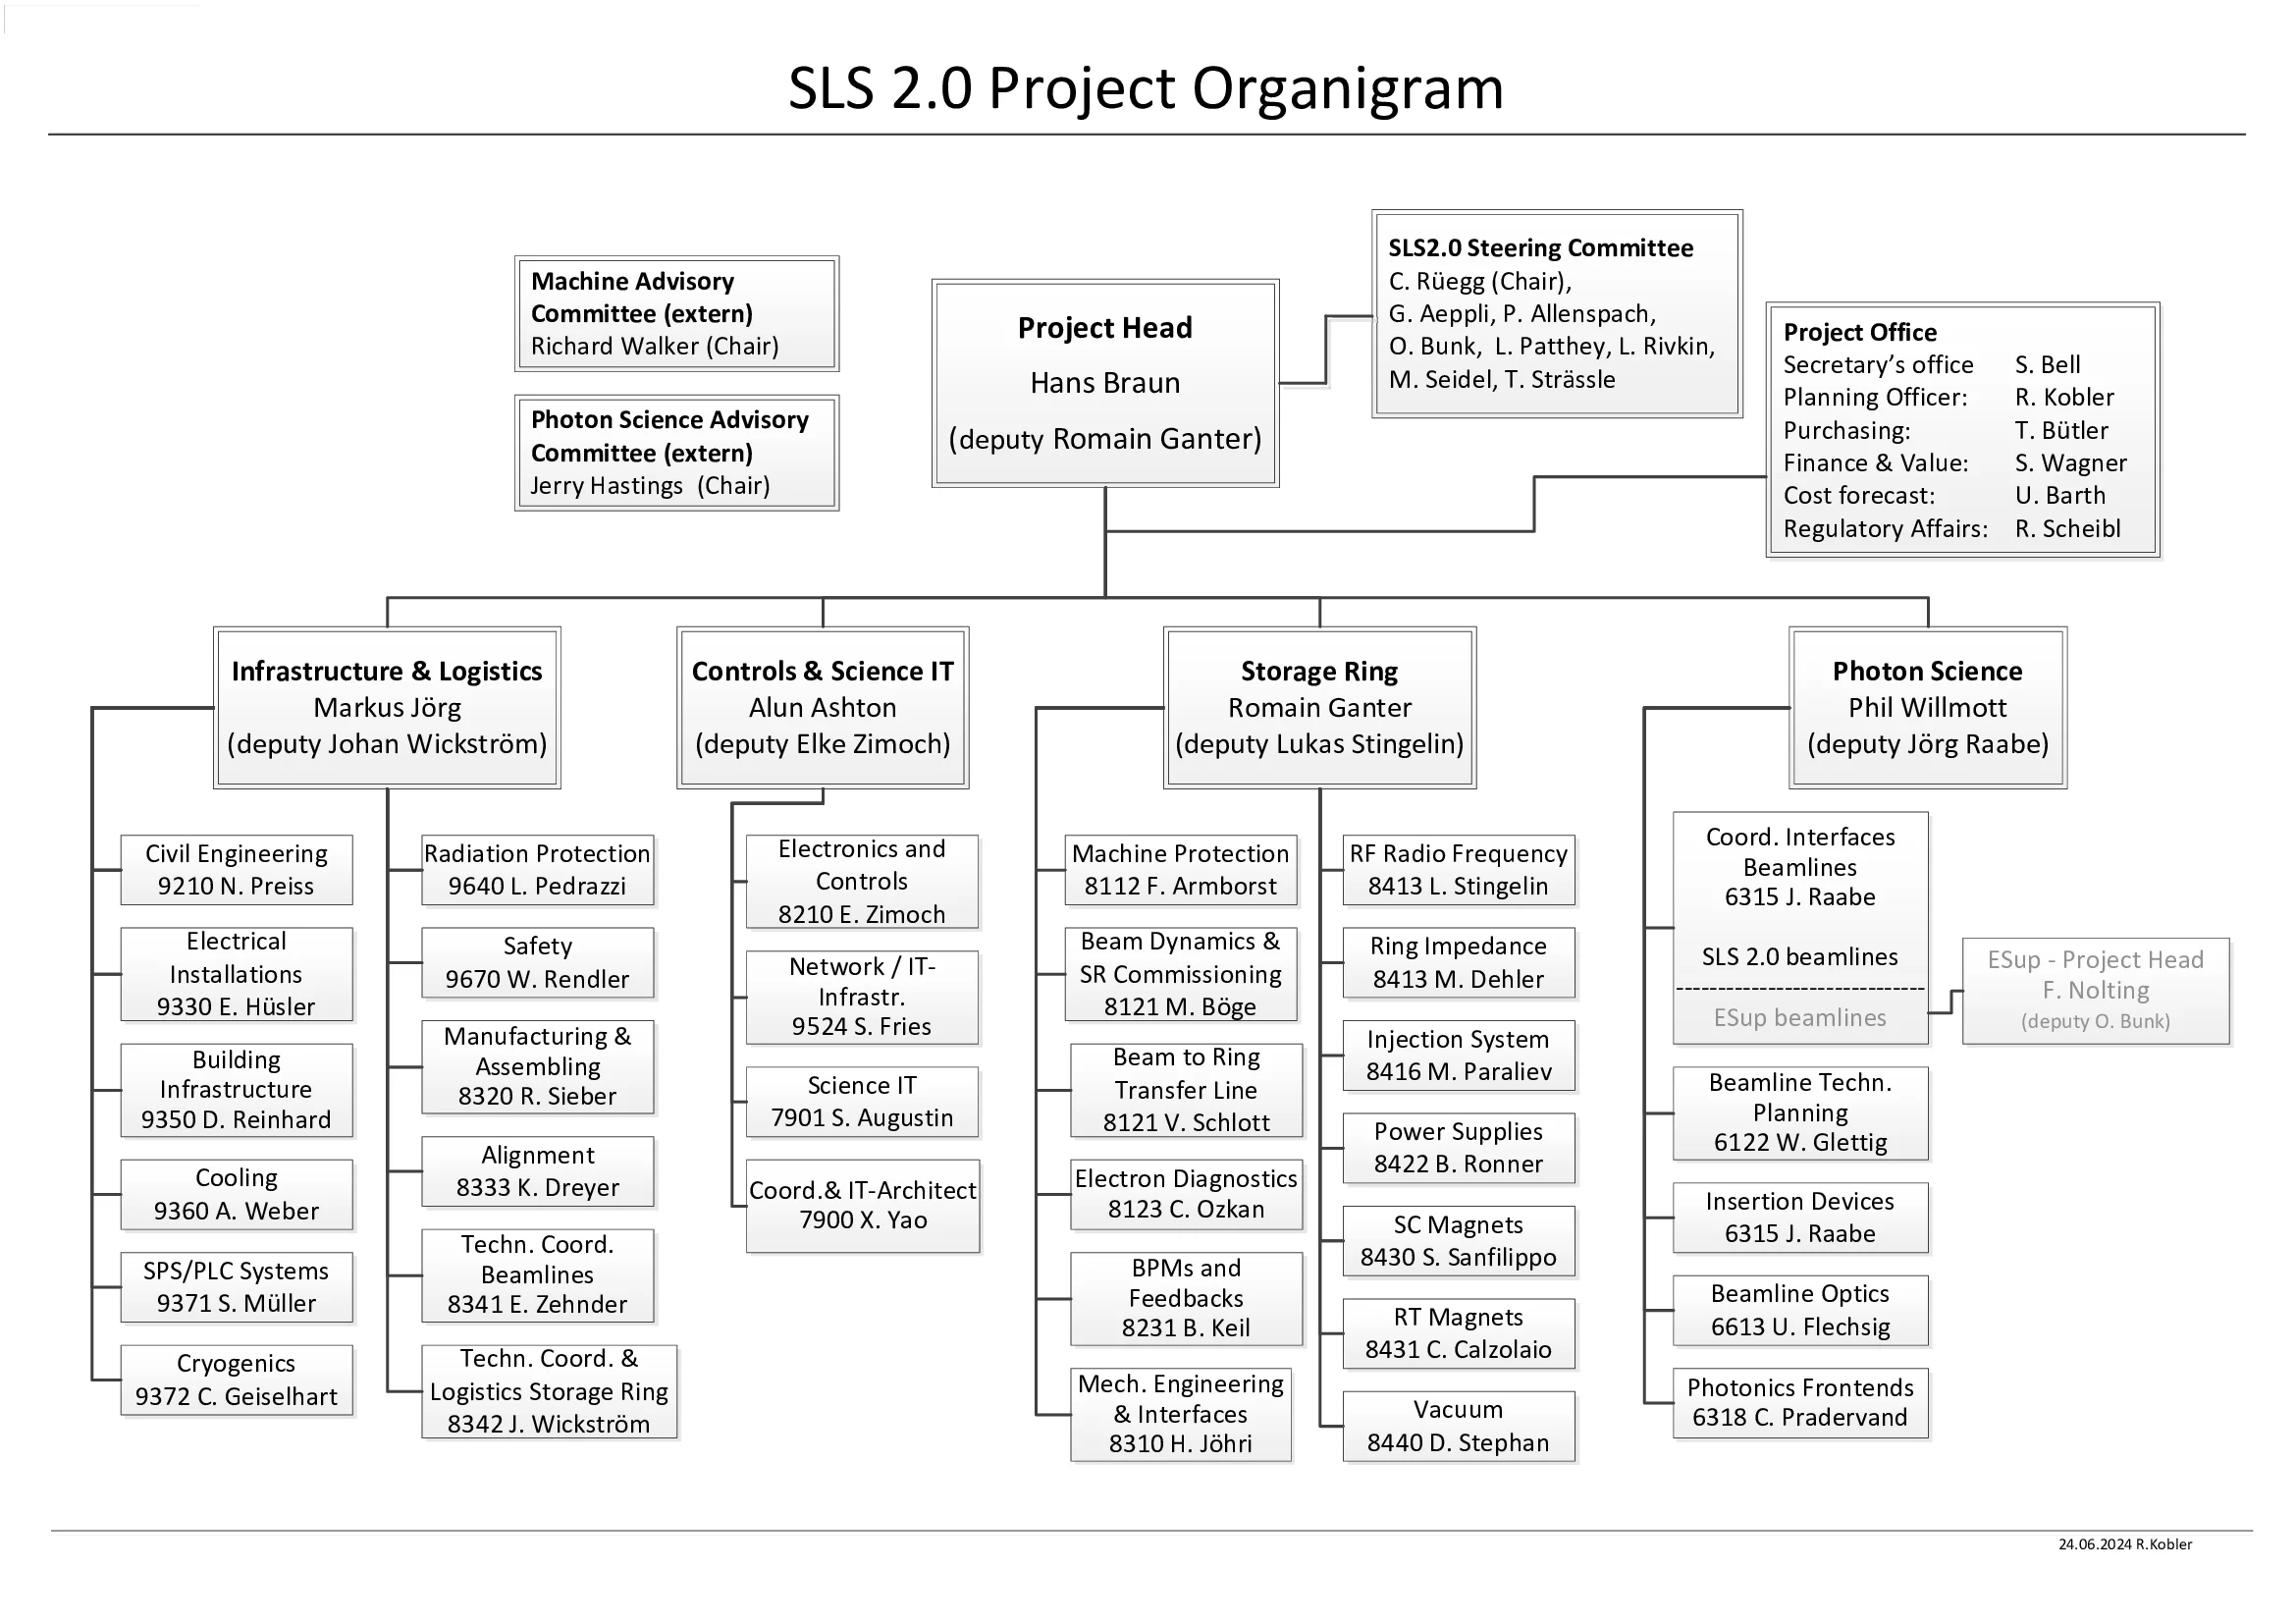 SLS 2.0 Project Organigram, listing the Project Head, Machine Advisory Comittee Head, Photon Science Advisory Committee Chair, Steering Committee, Project Office, and Subprojects including Infrastructure & Logistics, Conrols & Science IT, Storage Ring, and Photon Science